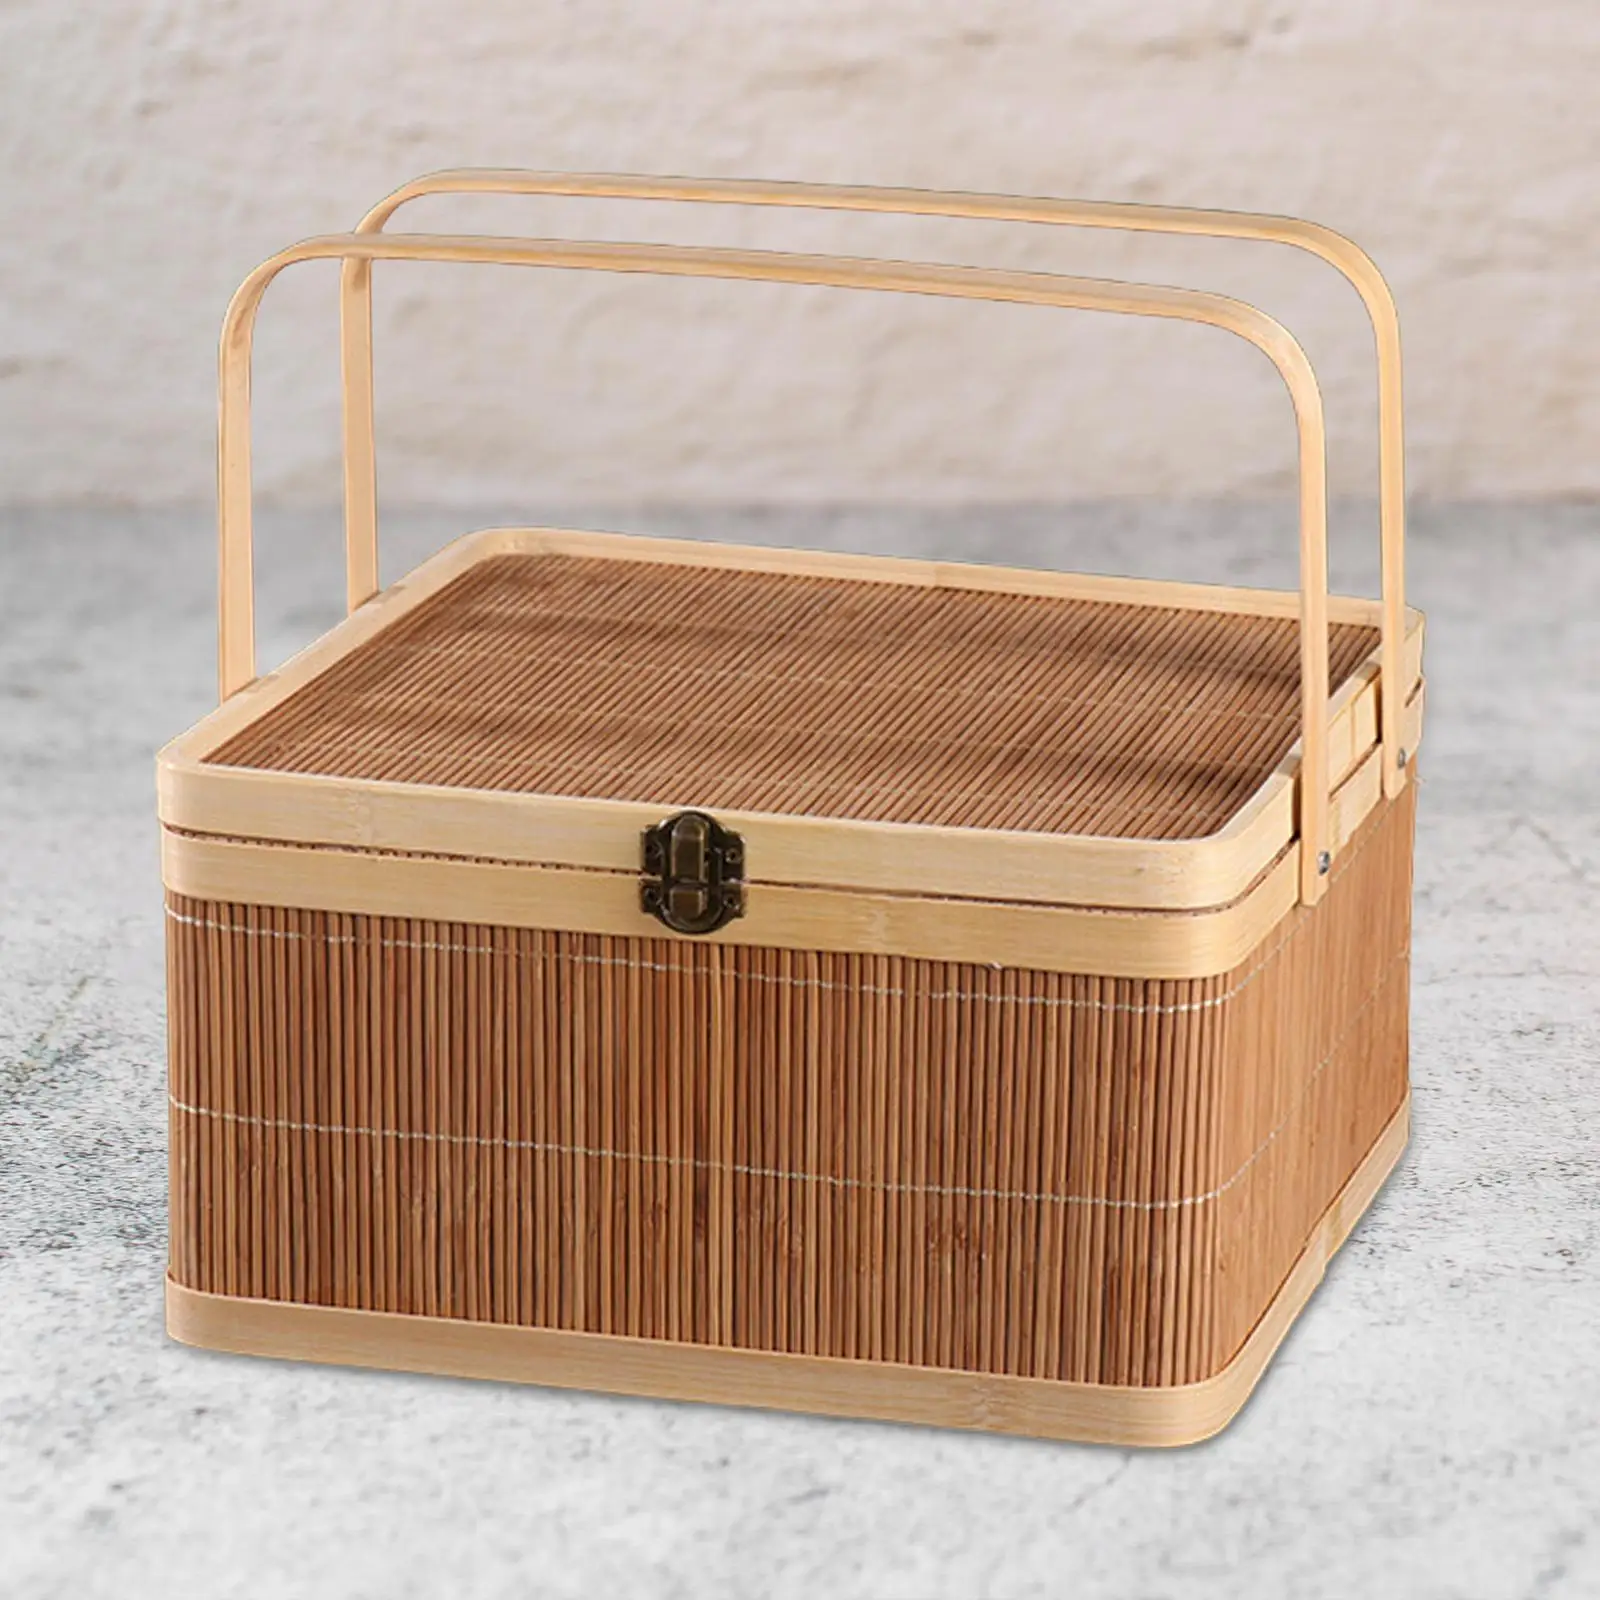 Bamboo Basket Serving Bread with Top Handle Cake Snacks Mooncake Gift Packing Basket Portable Organizer Food Bamboo Woven Basket